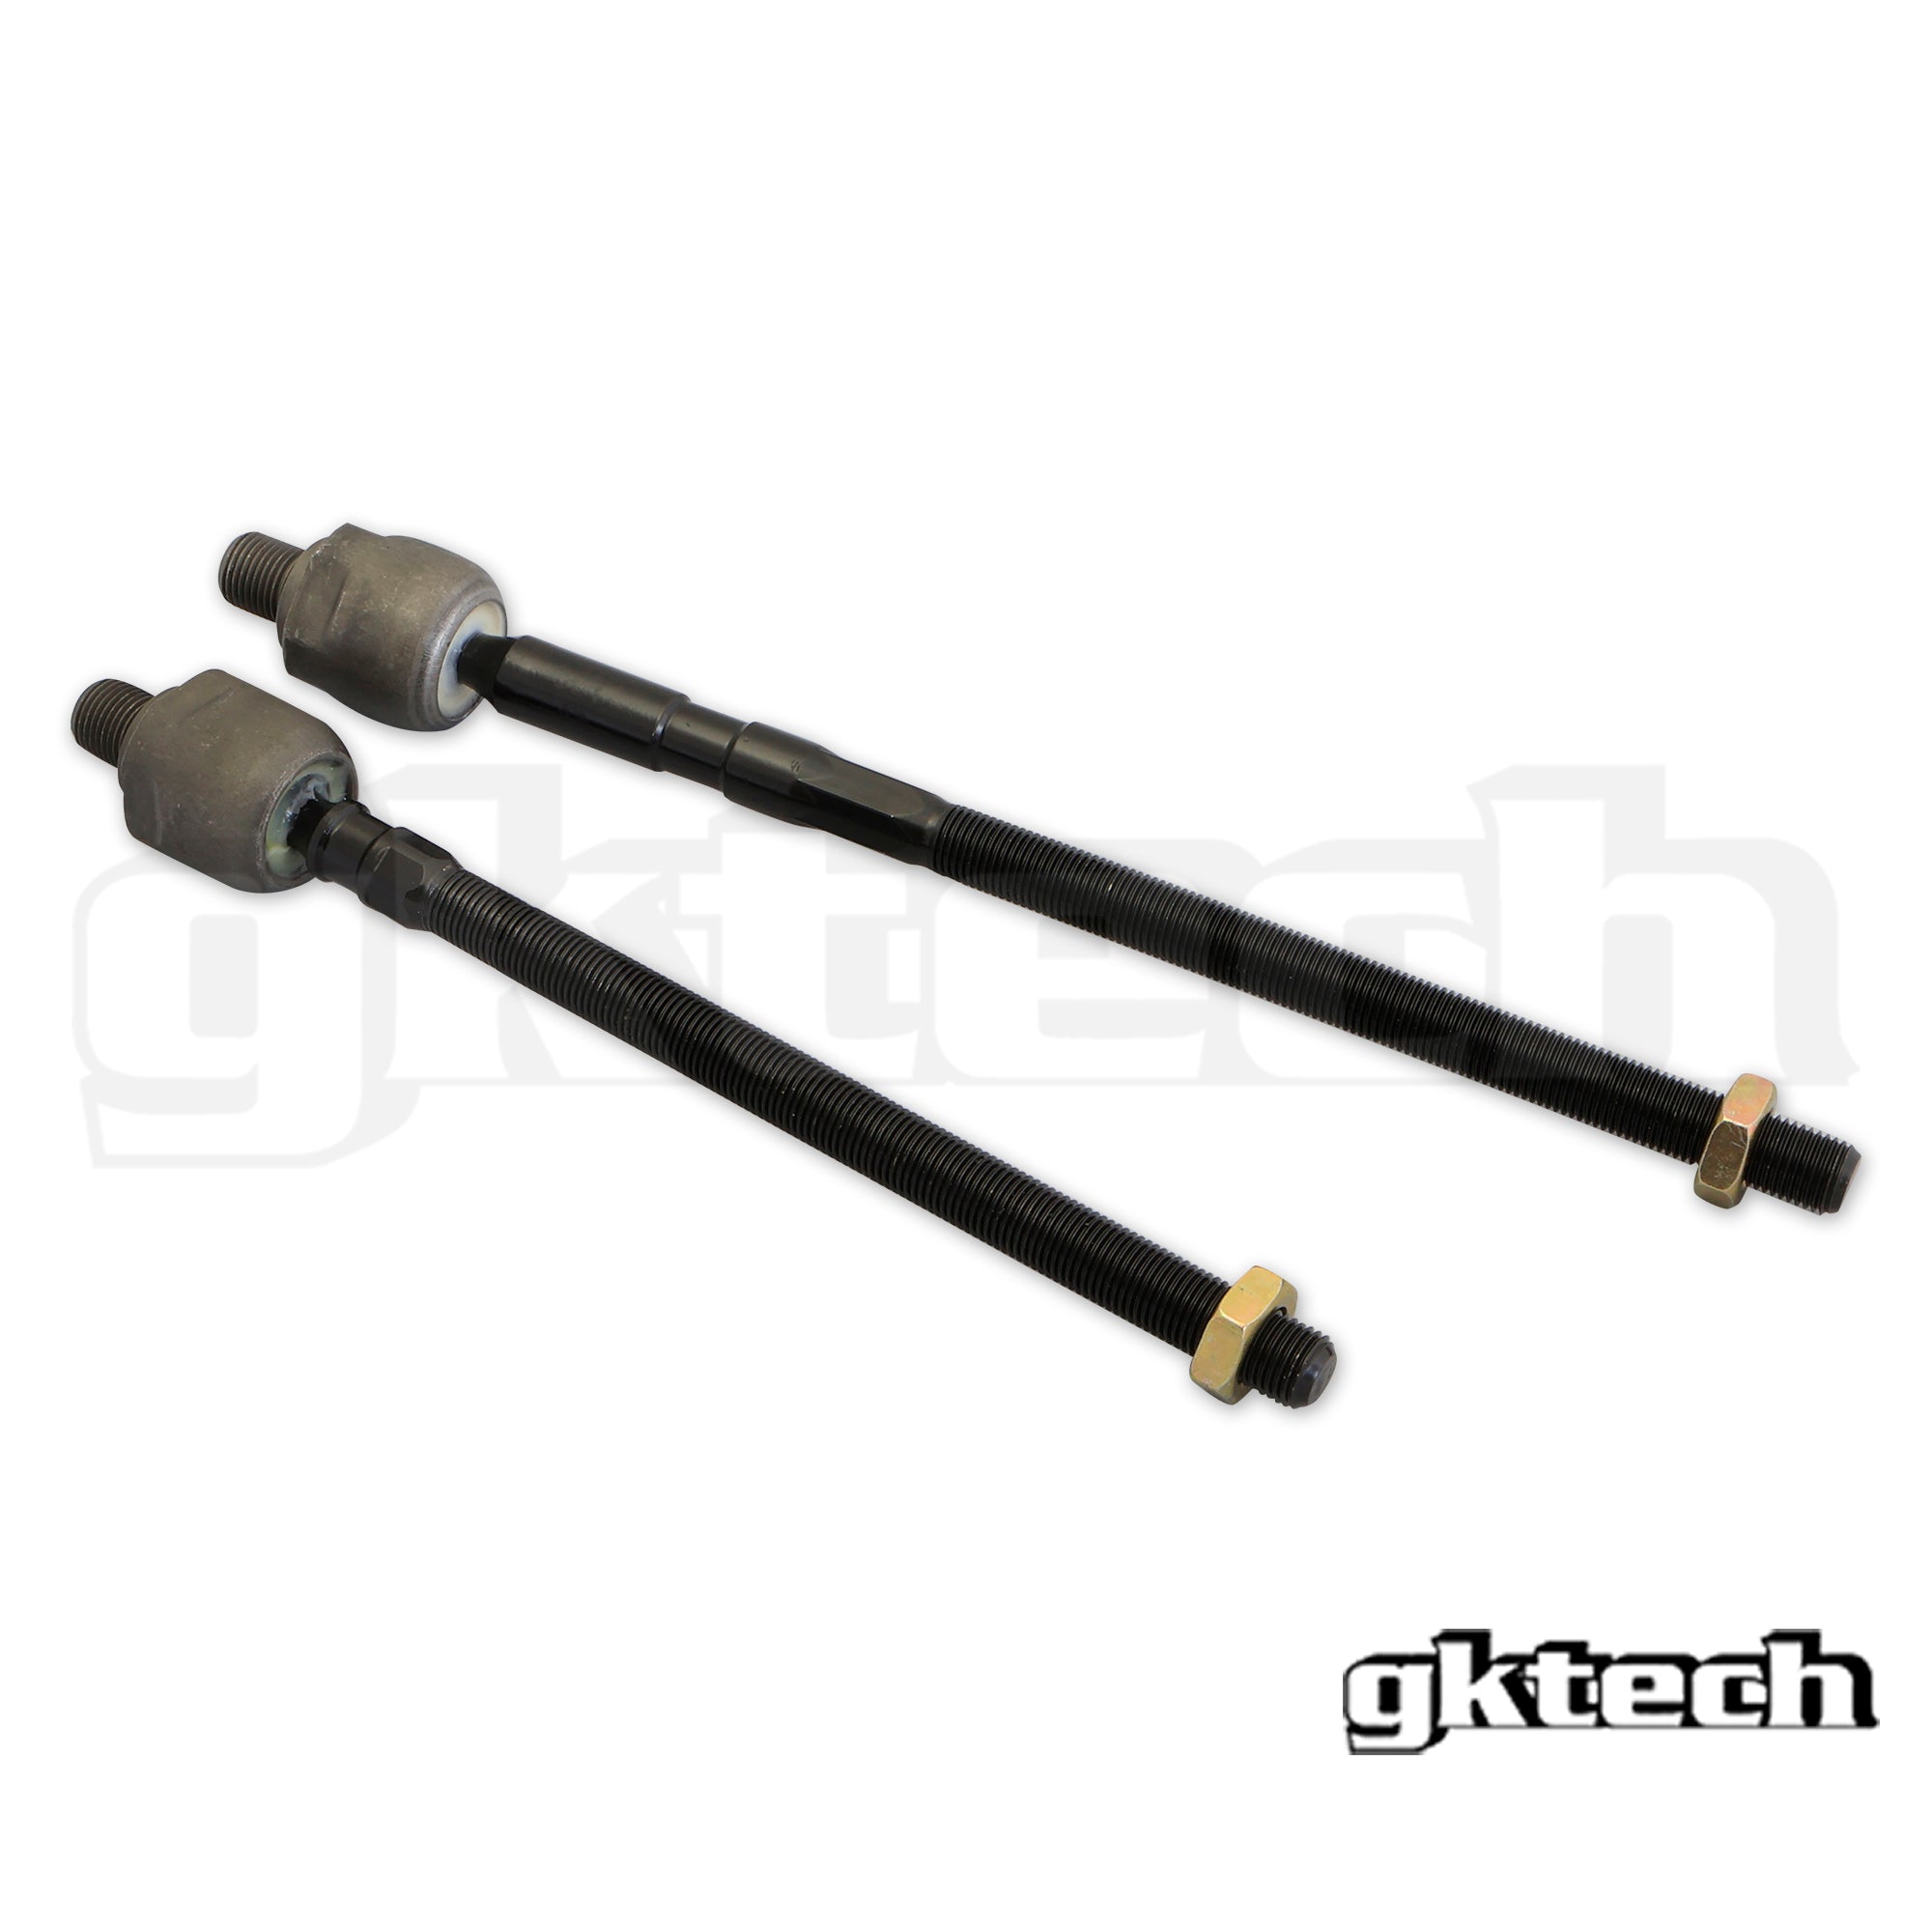 86 / GR86 / BRZ Super Lock replacement inner tie rod - SOLD INDIVIDUALLY